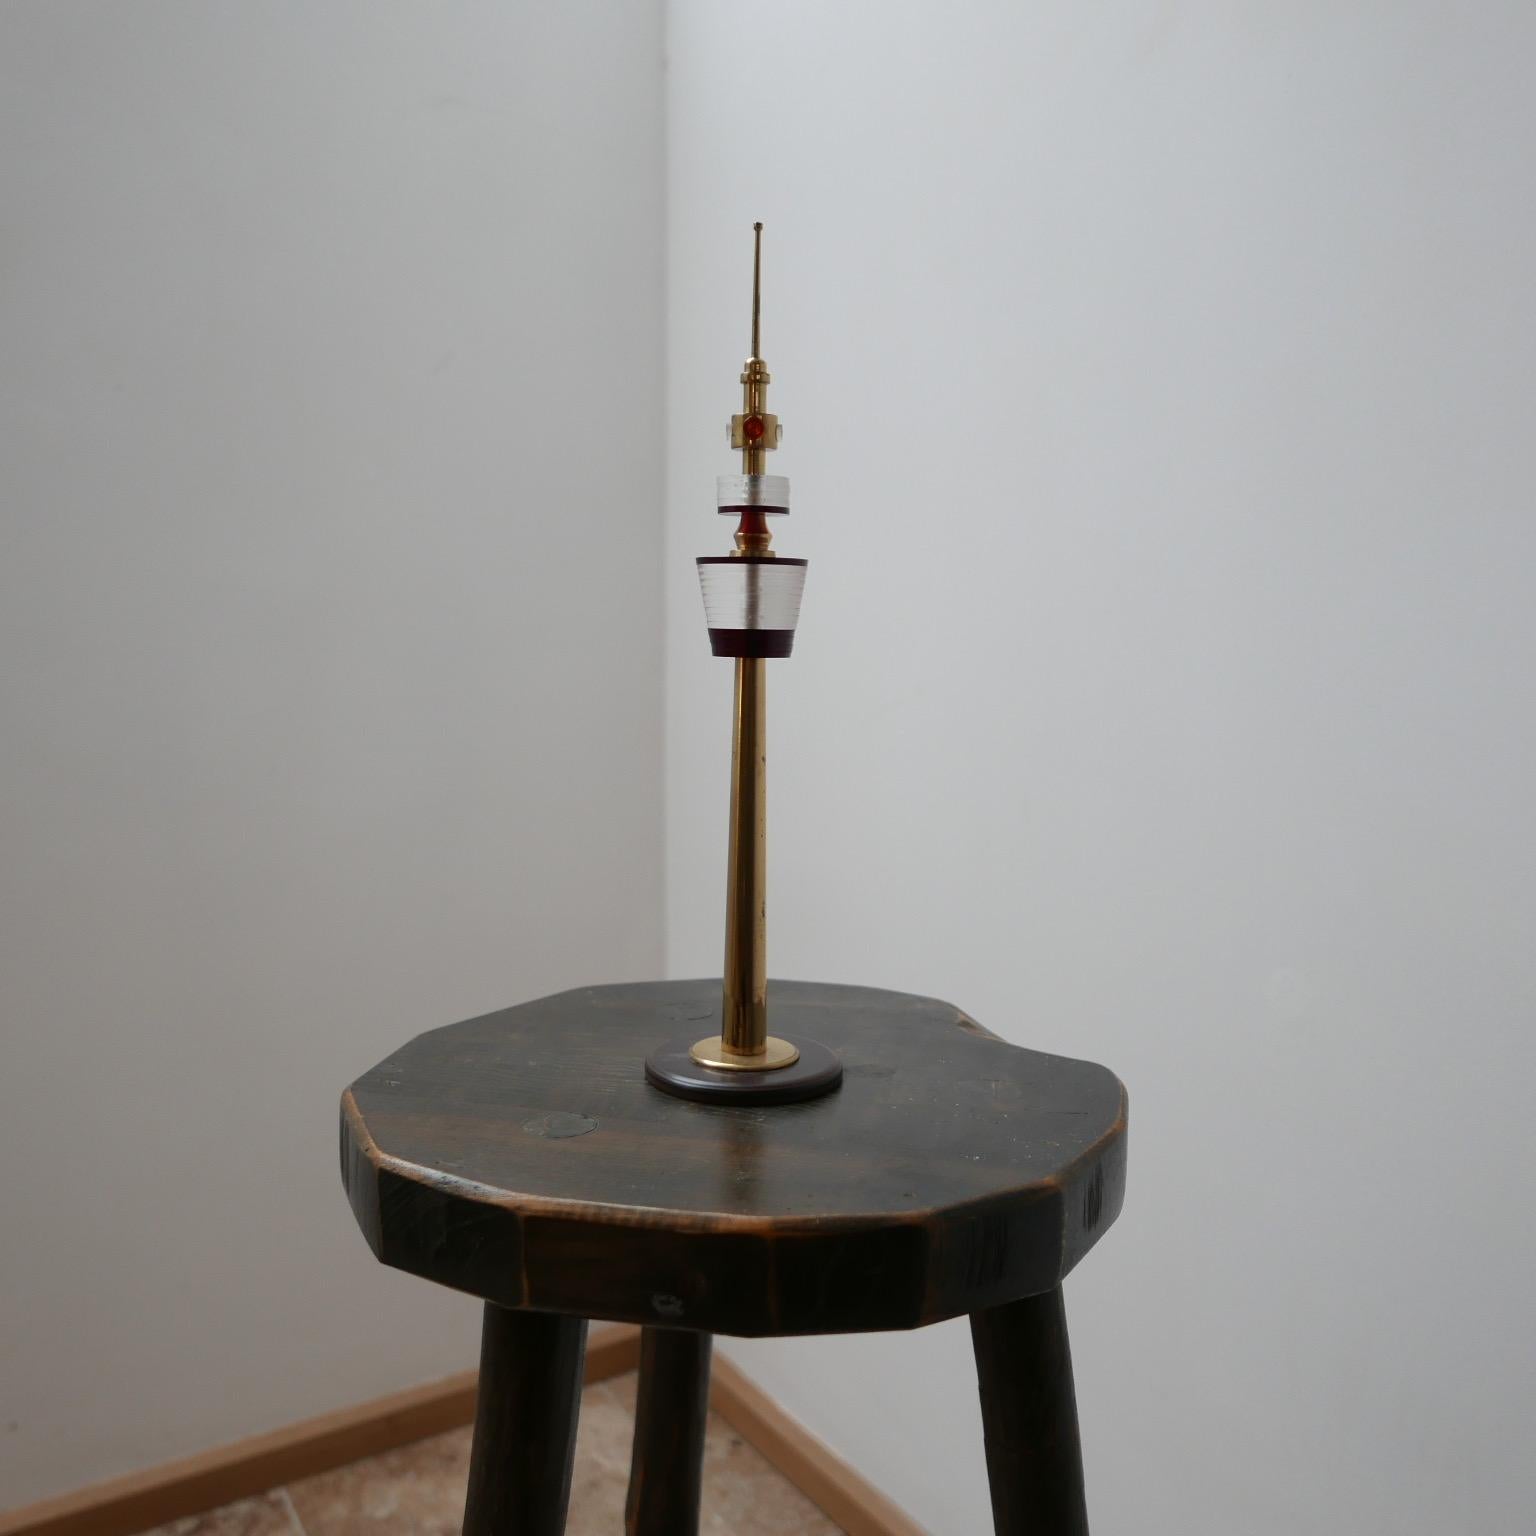 A brass and perspex TV tower model replica. 

Highly collectable and sculptural,

circa 1970s, German. 

Believed to be from Dusseldorf. 

Other models we also have available, they look great in combinations on a mantelpiece, shelf or as a